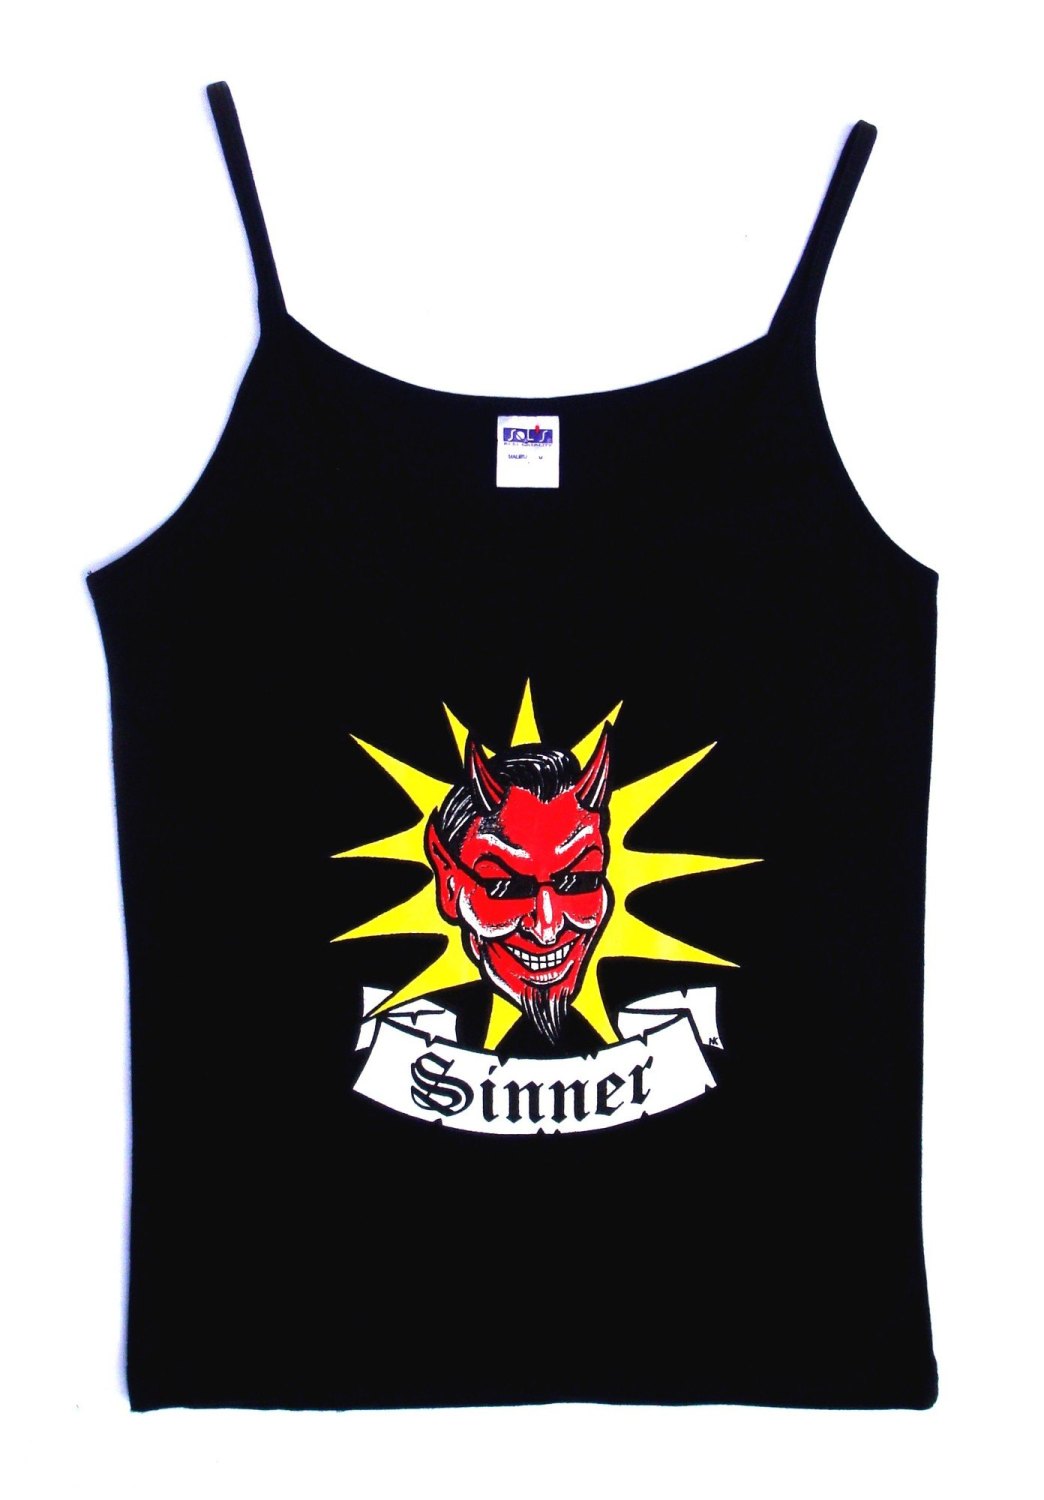 Rock N Roll Suicide Devil Sinner Black Strappy Top Small